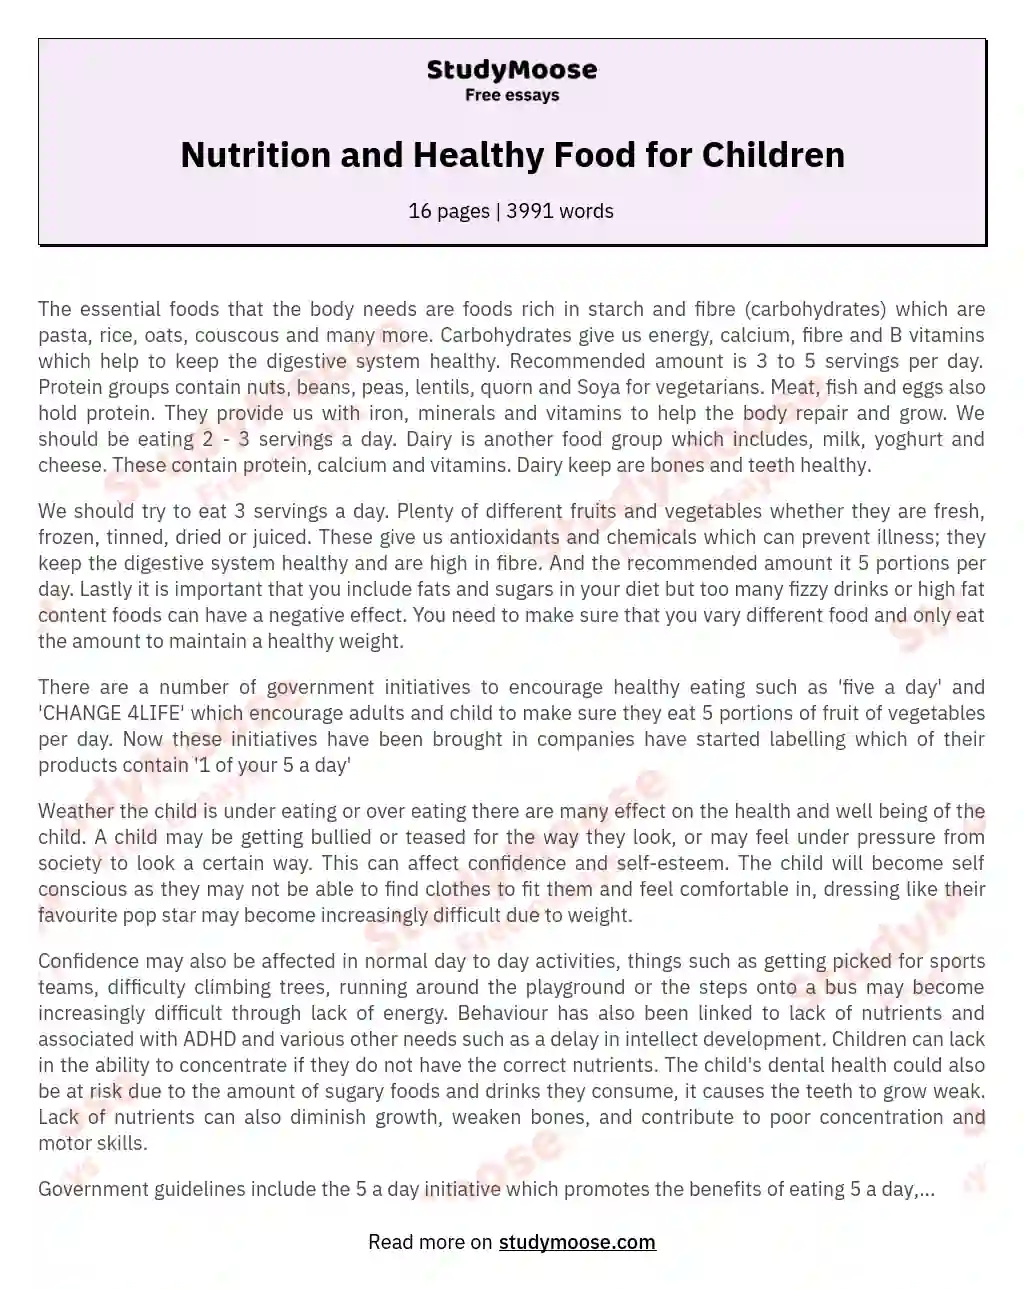 Nutrition and Healthy Food for Children Free Essay Example